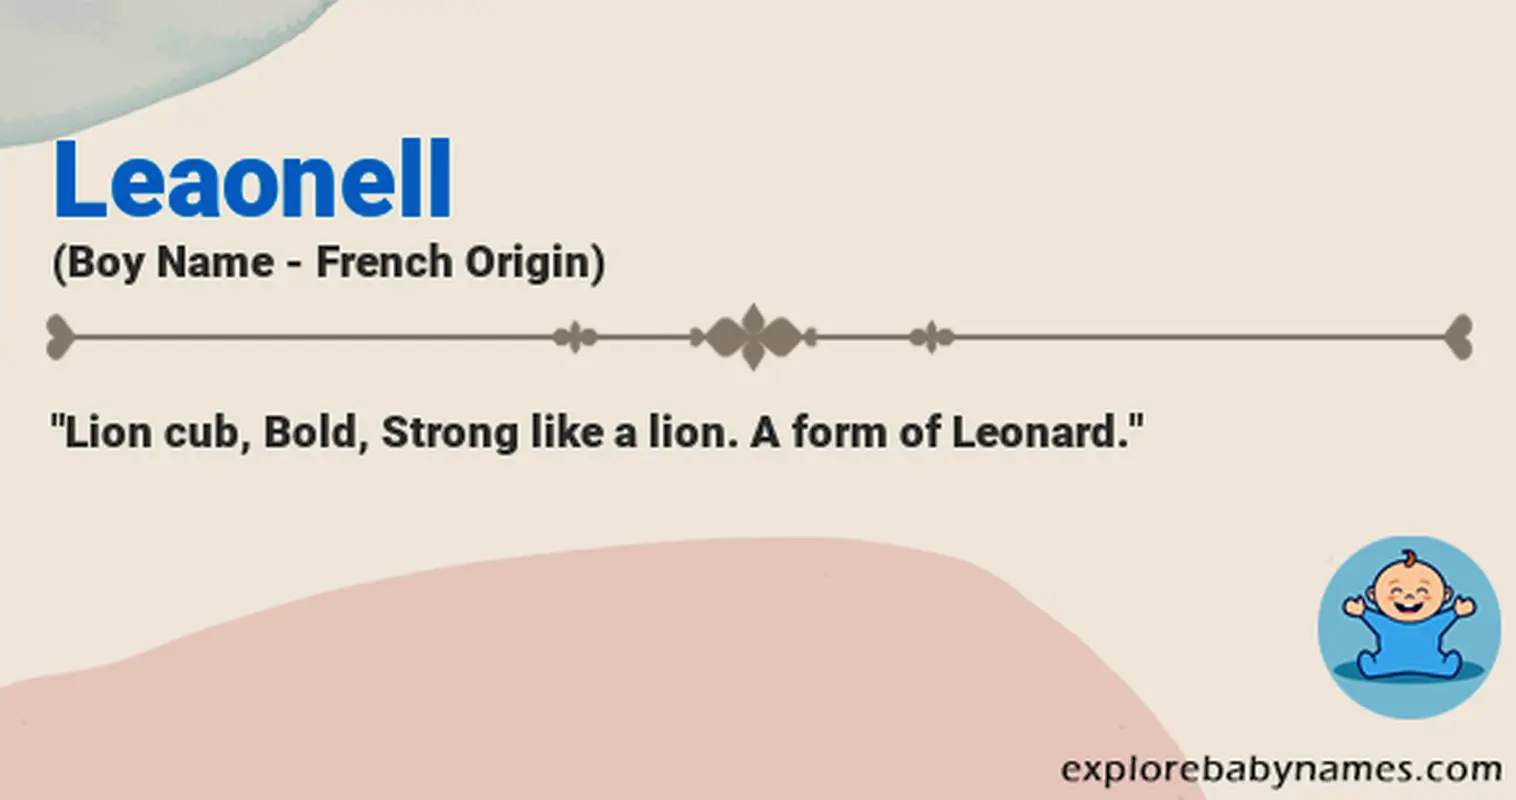 Meaning of Leaonell